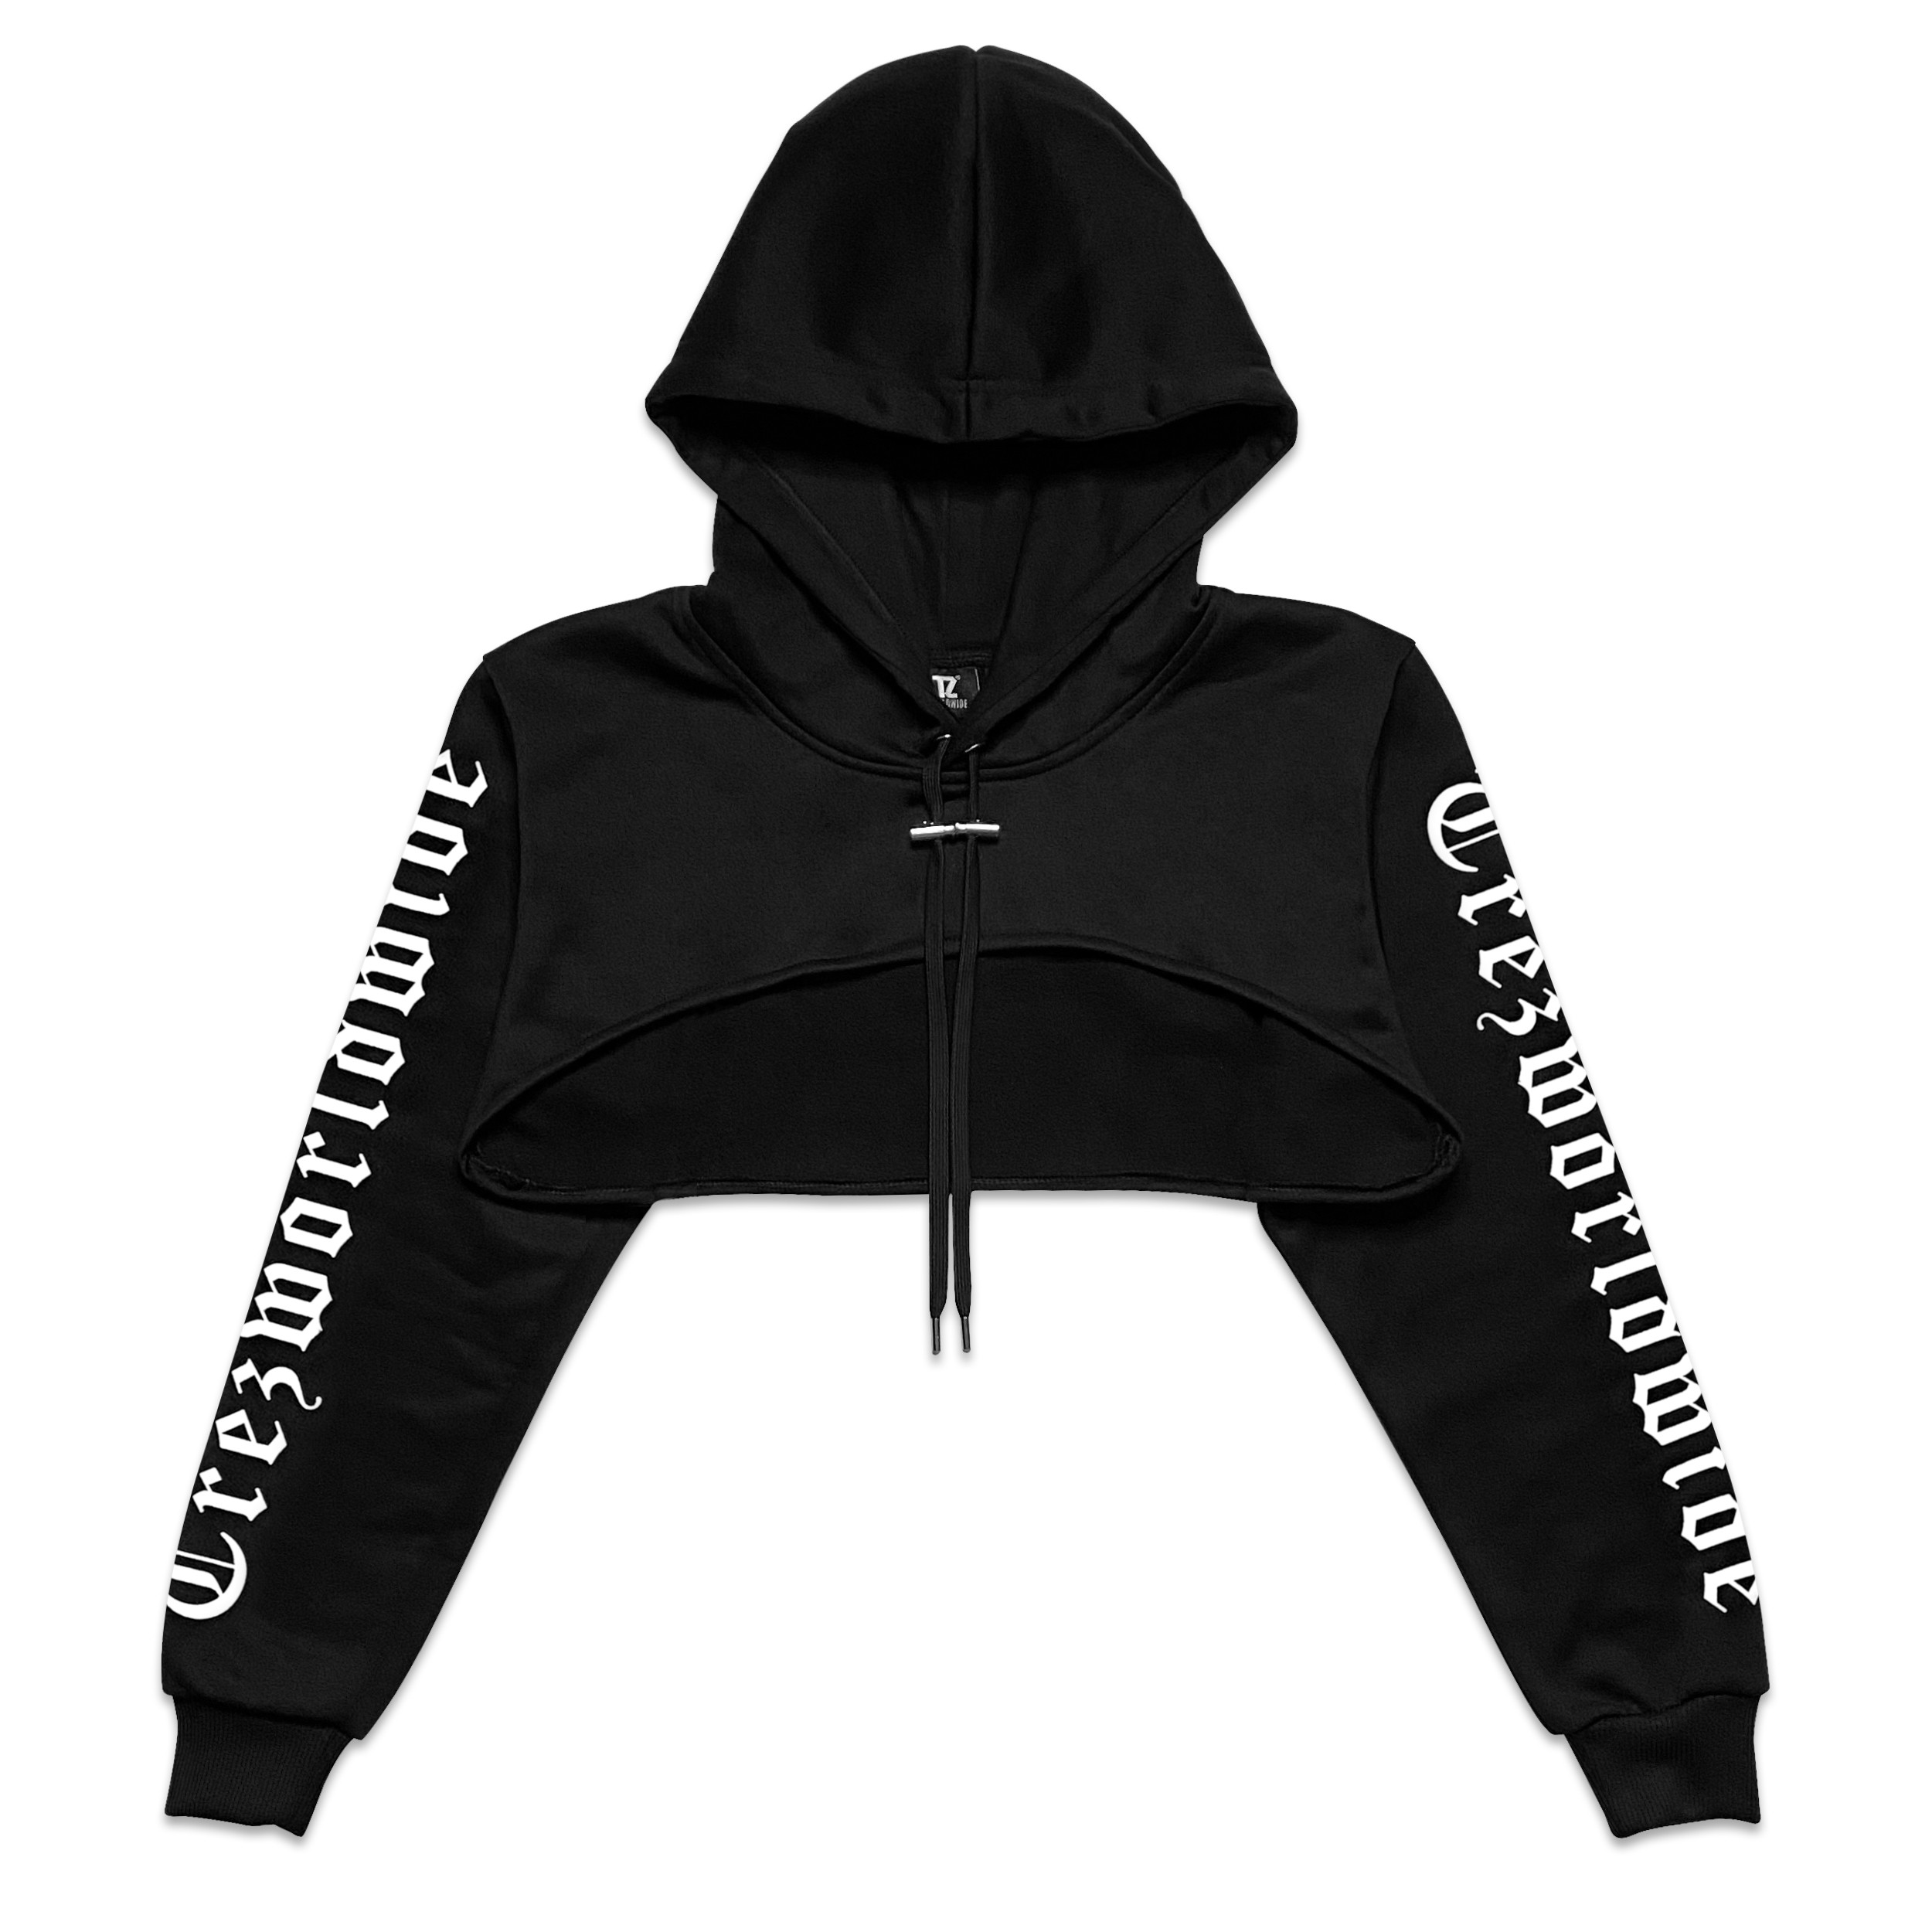 Be Trez High Cropped Hoodie - Black (Glow in the dark - Yellow) Size M